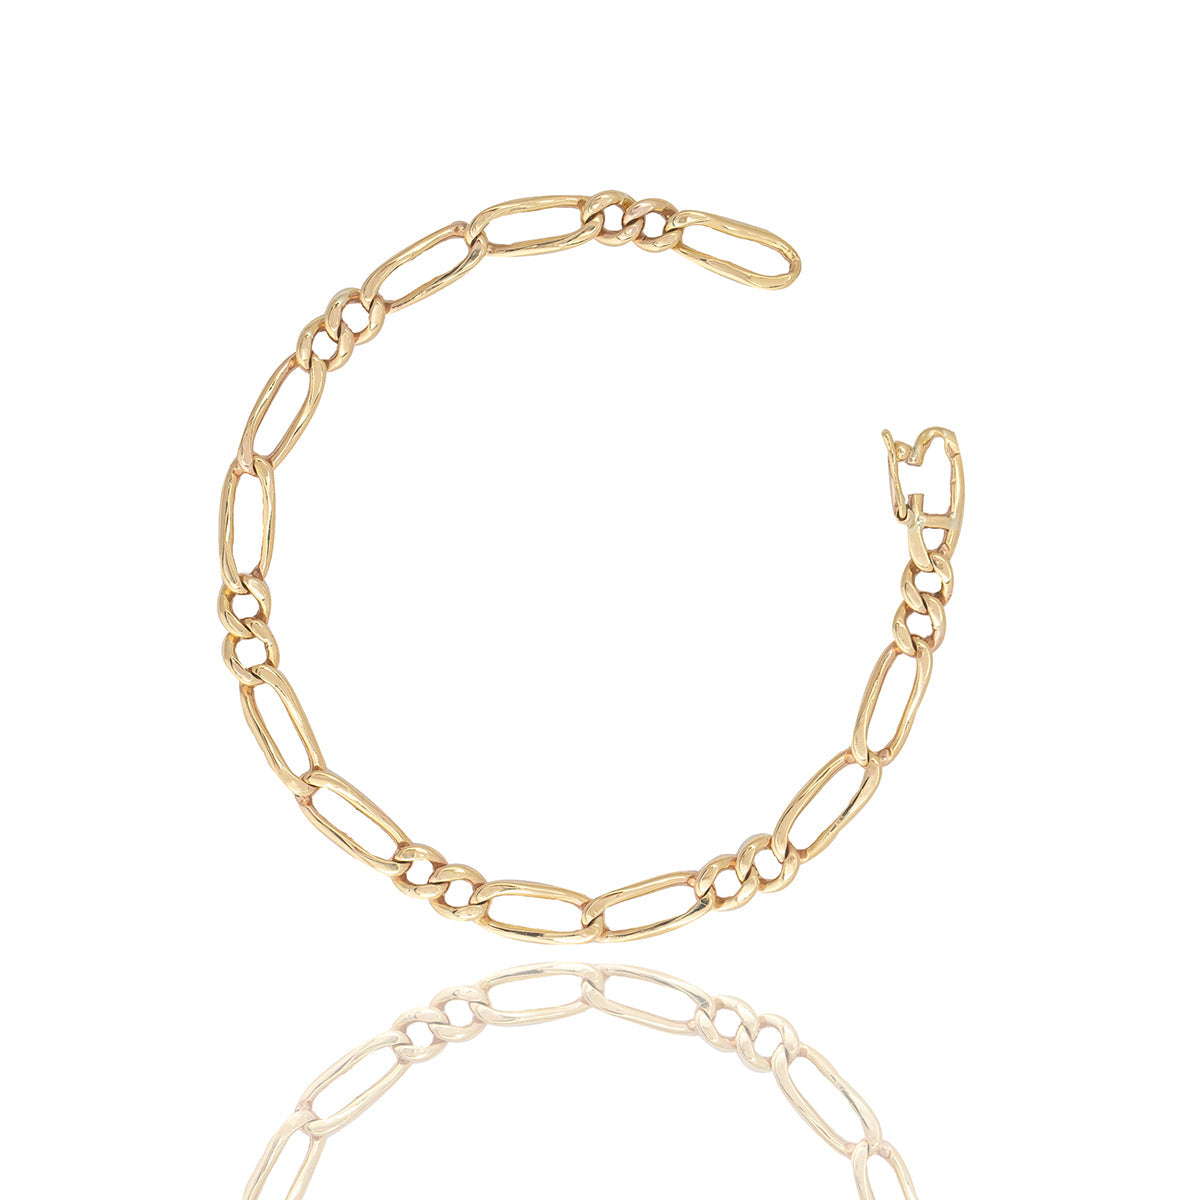 Timeless Touch: Bracelet for Lasting Style